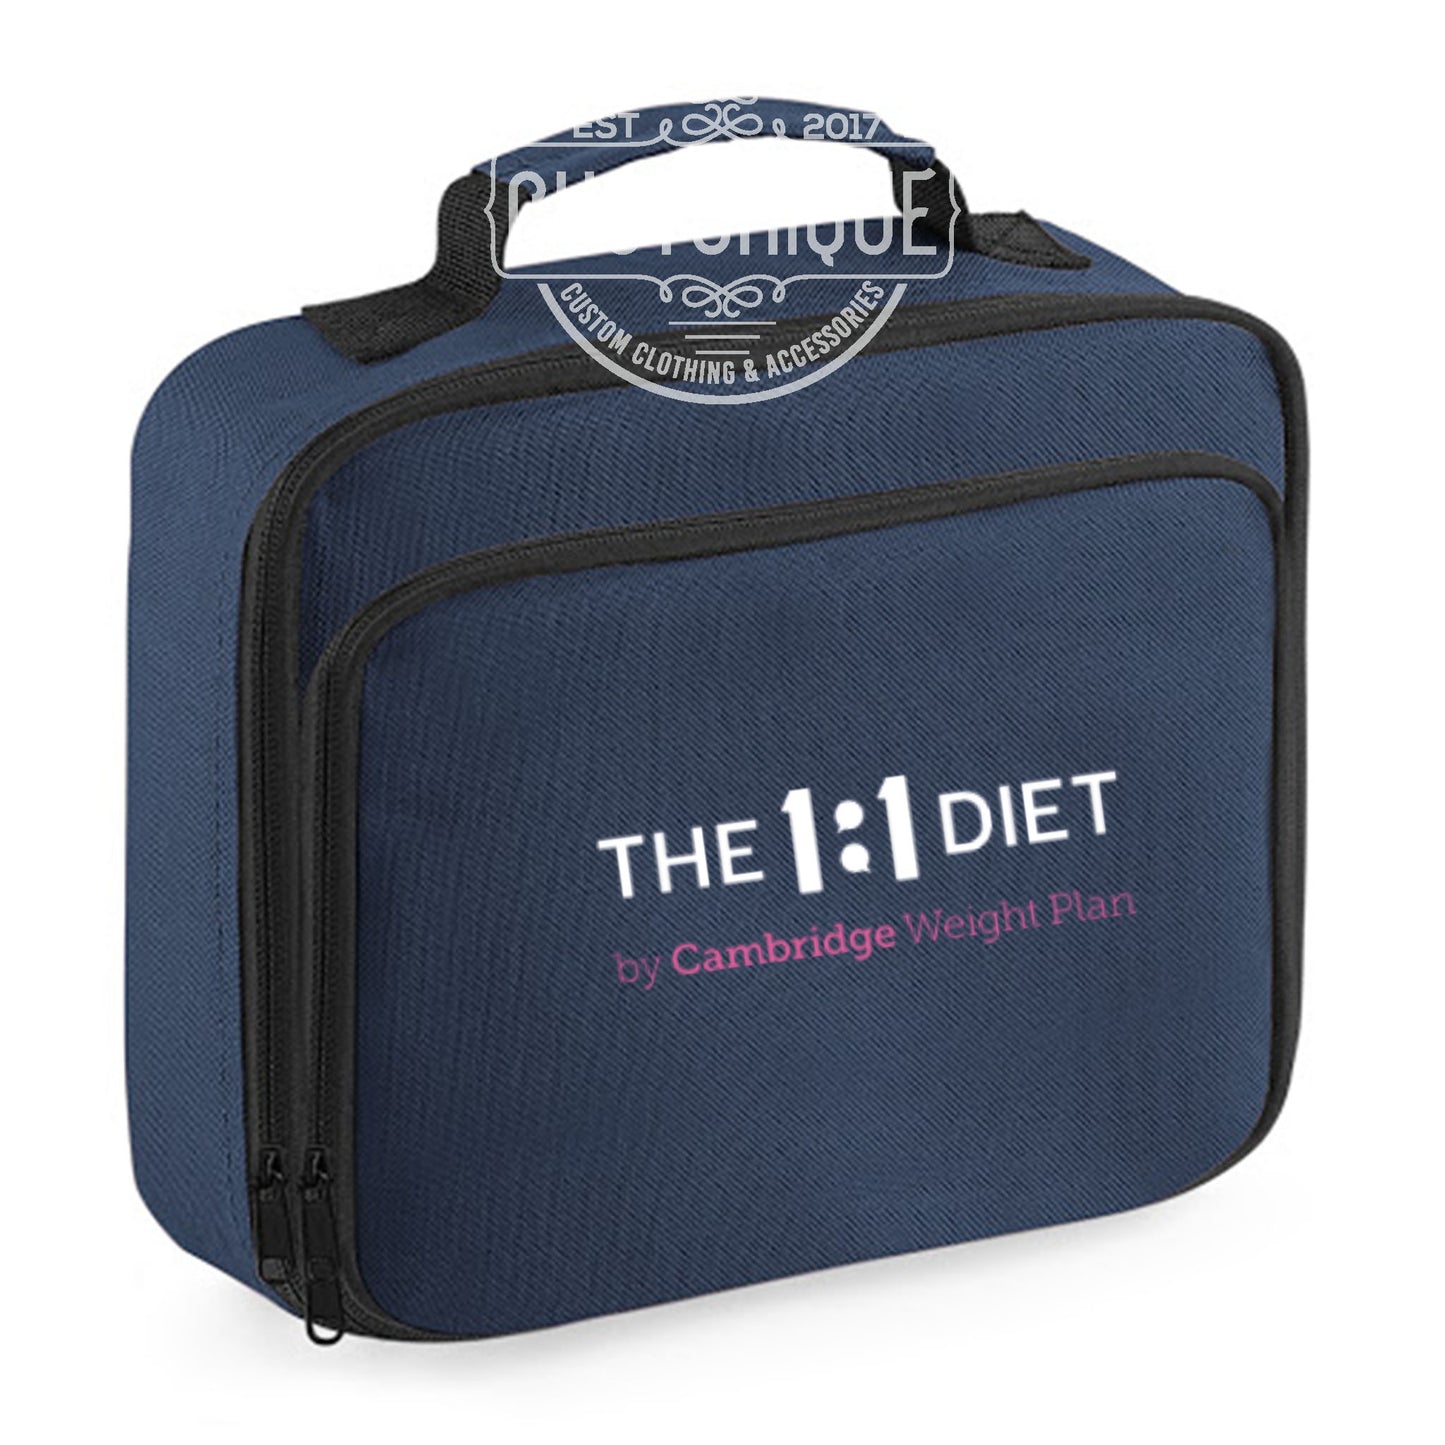 The 1:1 Diet - Lunch Bag